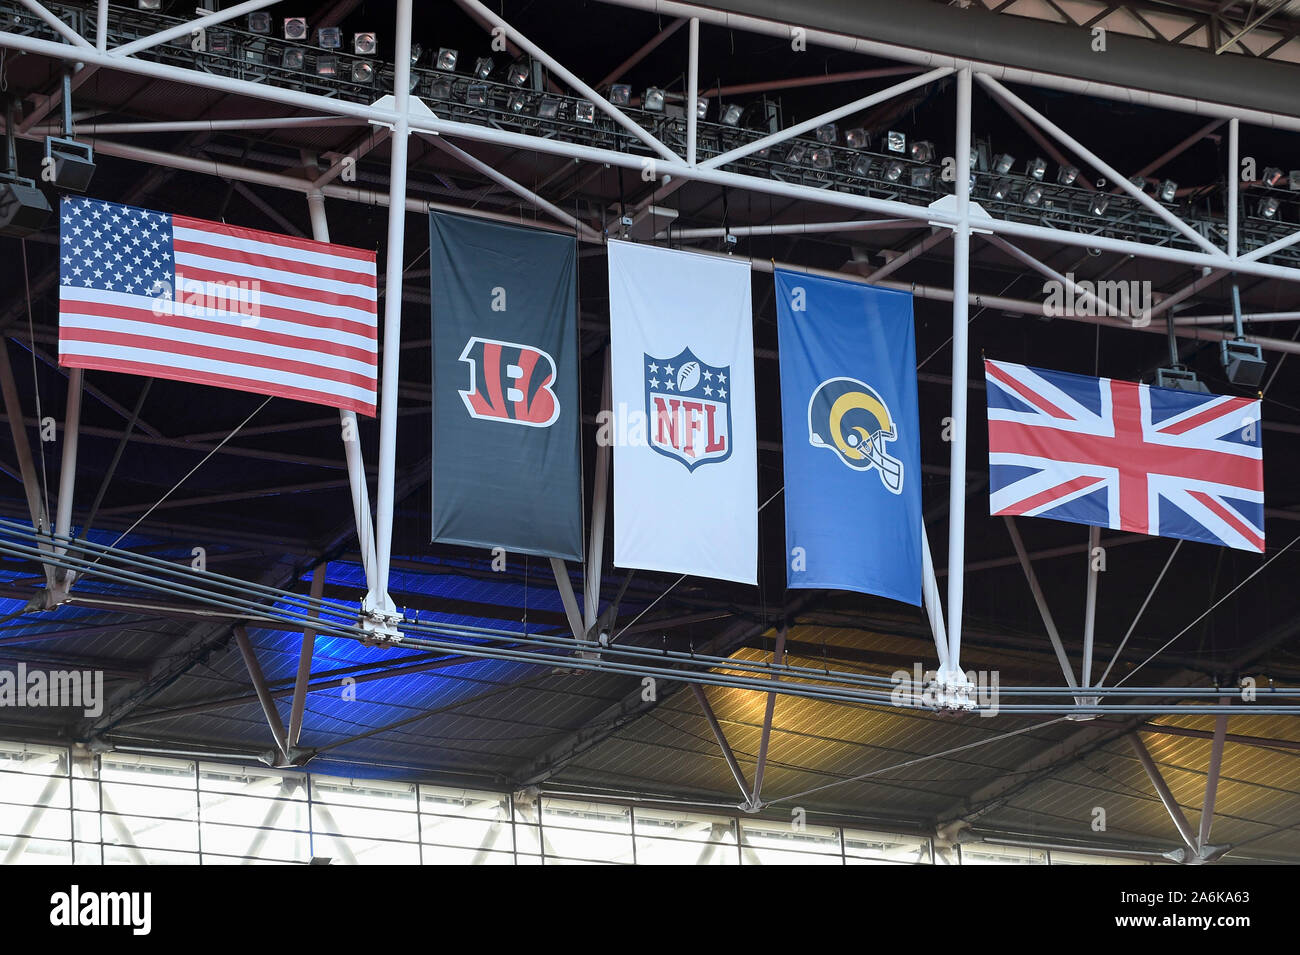 London, UK. 27 October 2019. National and team flags fly overhead ahead of  the NFL match Cincinnati Bengals v Los Angeles Rams at Wembley Stadium,  game 3 of this year's NFL London